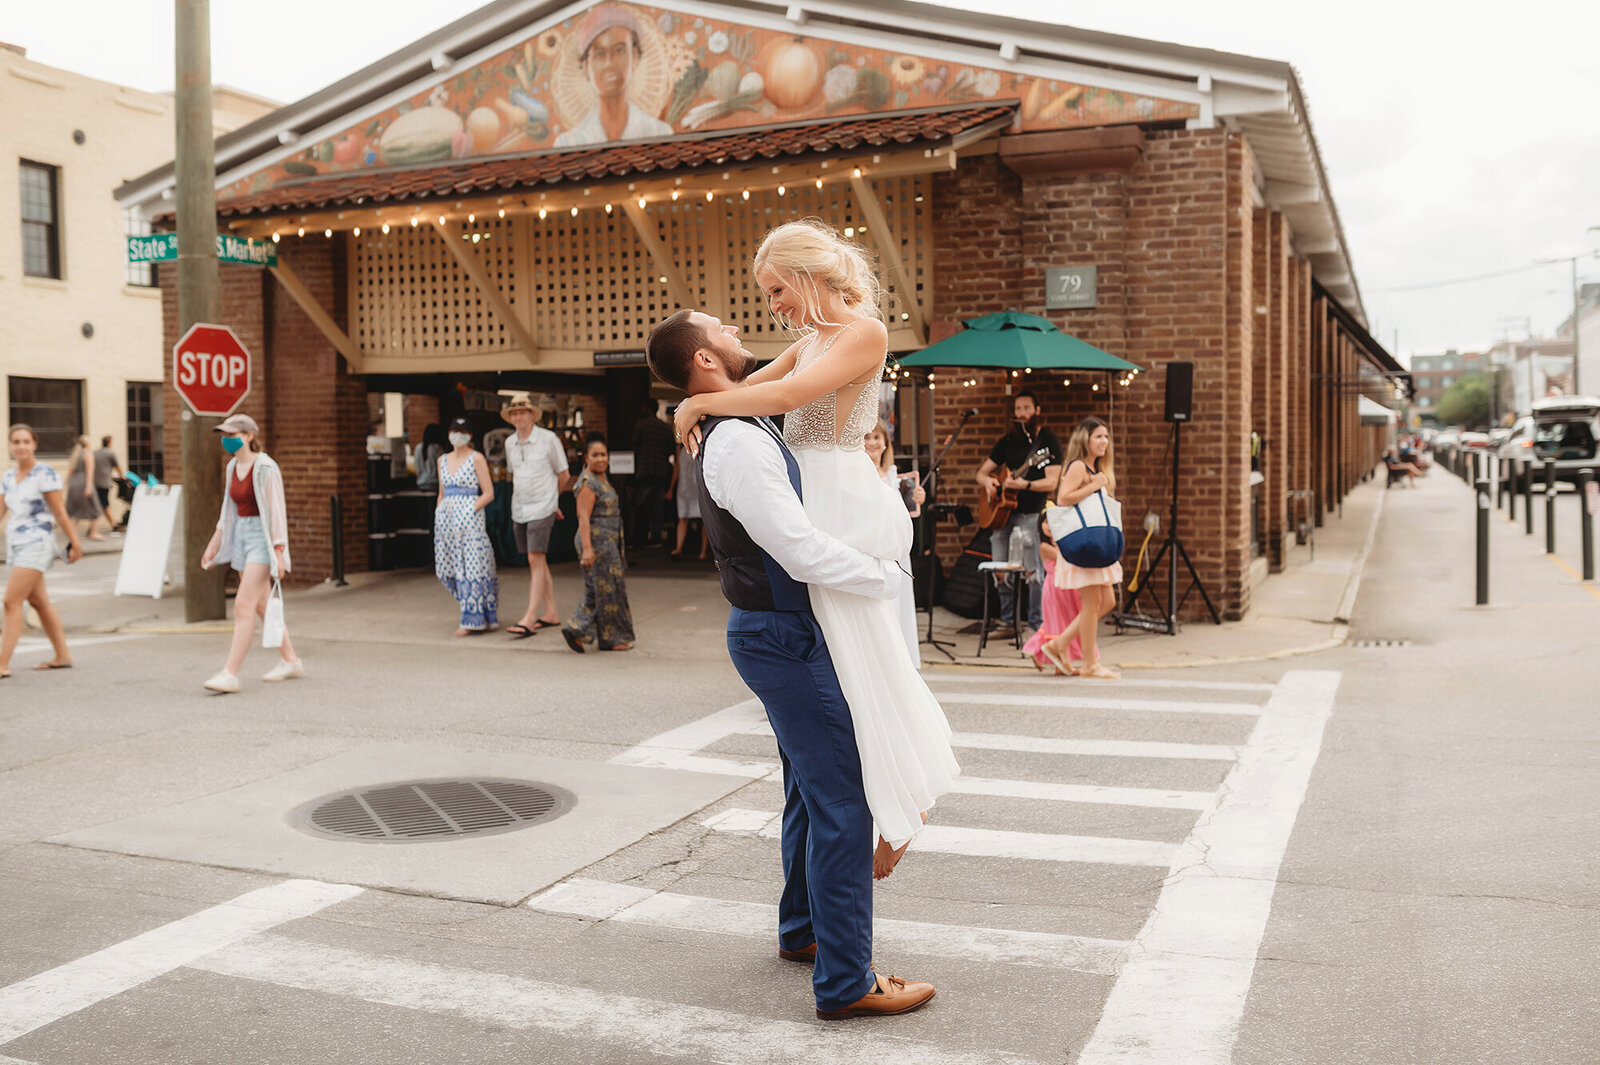 Bride and Groom dance in the street in front of the city market after their Micro-Wedding Ceremony in Charleston, SC.